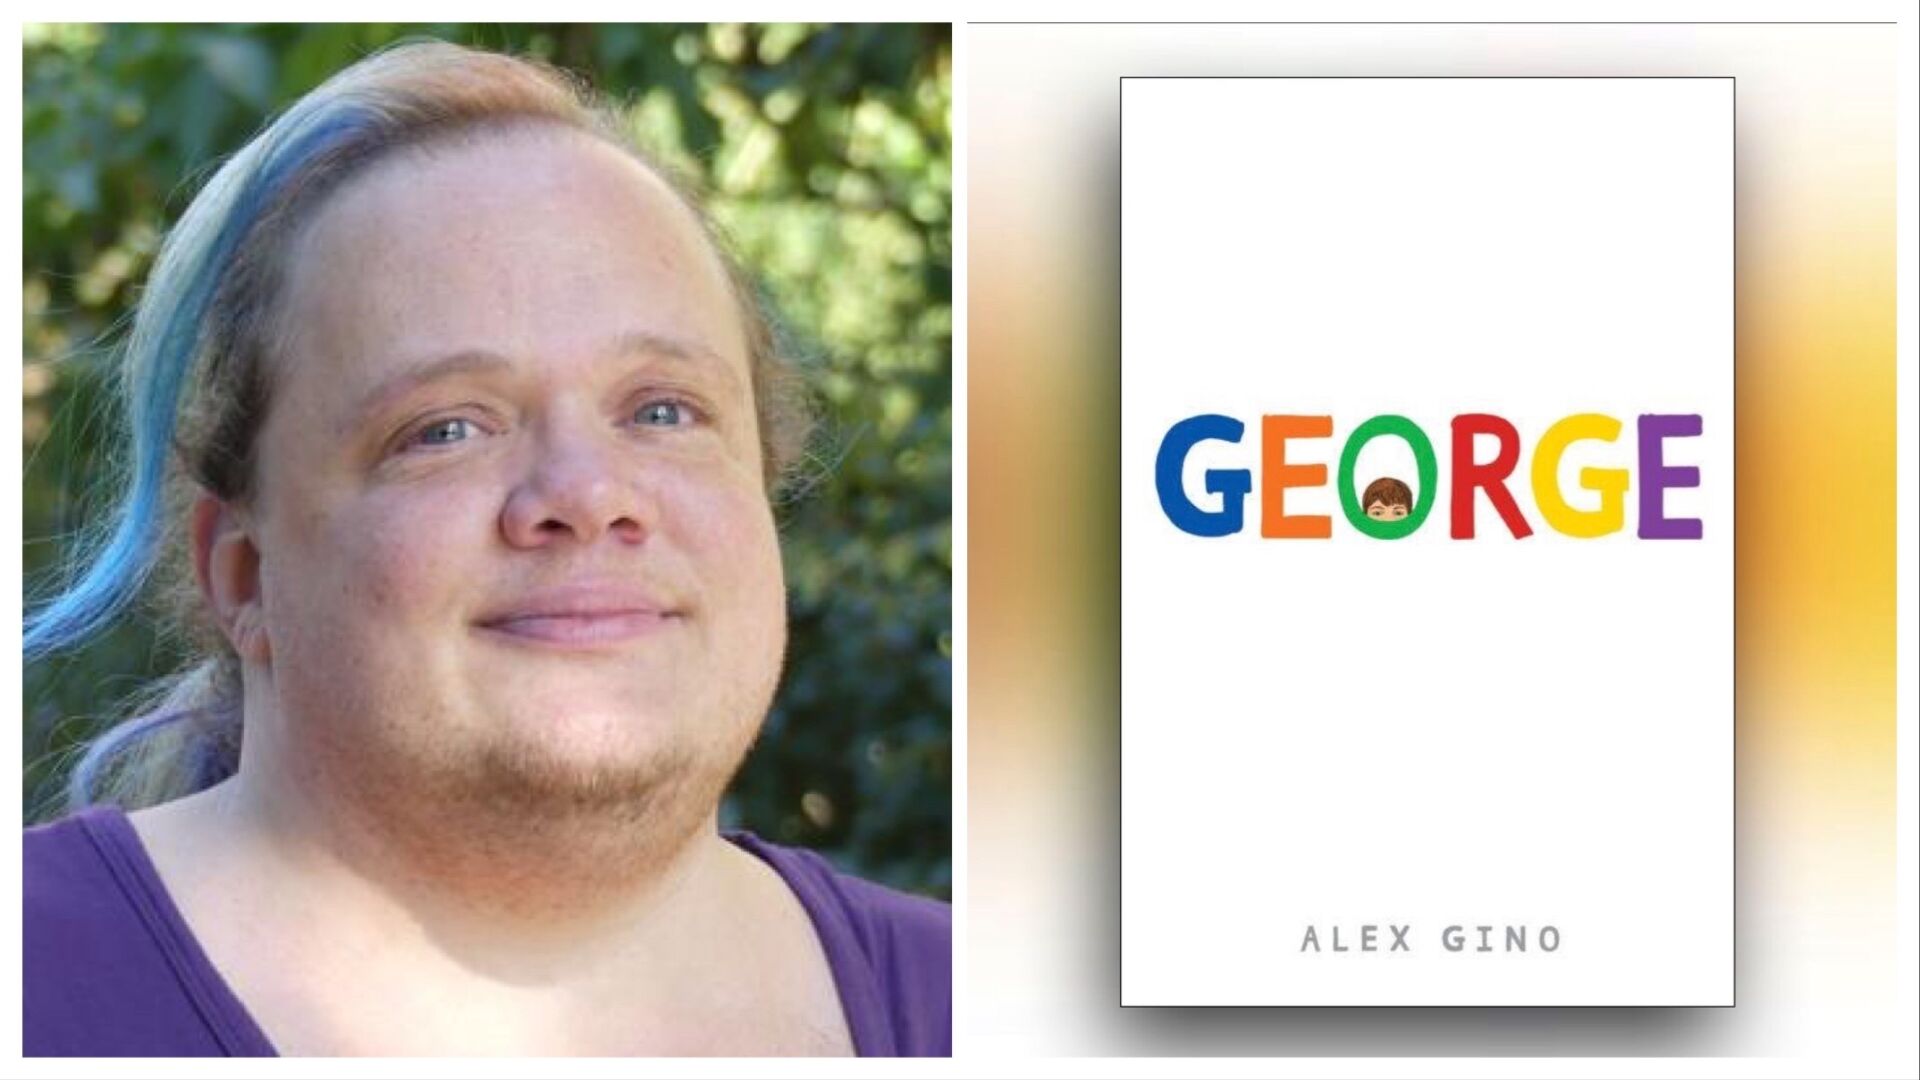 “George” Author Weighs in on Push to Remove Book From Moore County Schools News thepilot